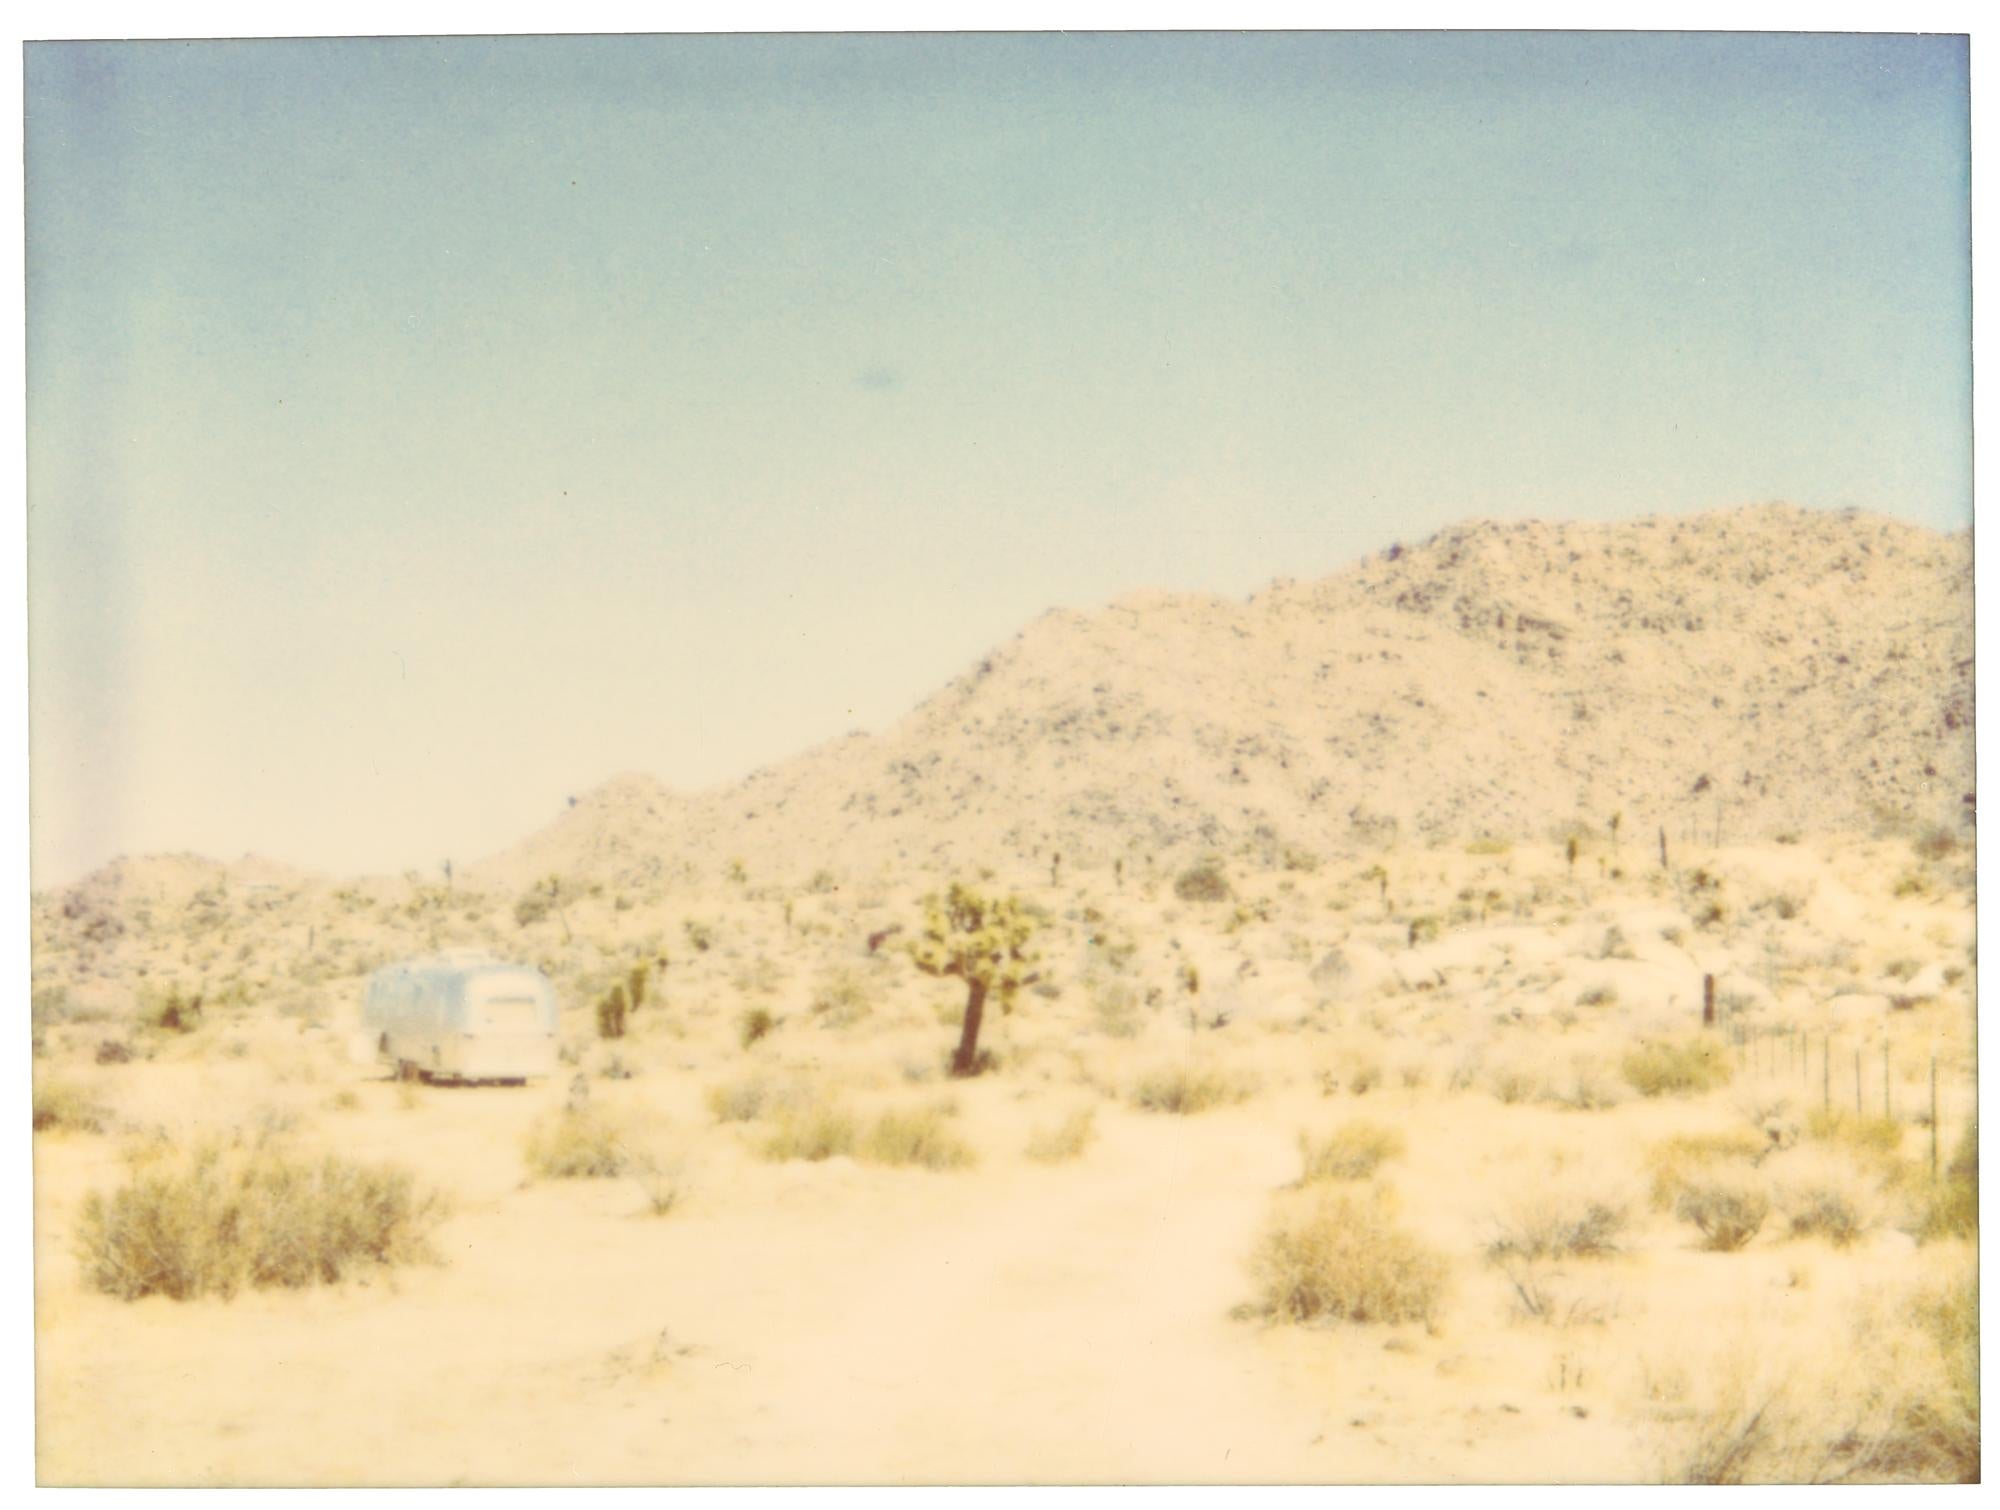 Stefanie Schneider Color Photograph – Old Woman Spring Road (29 Palms, CA)